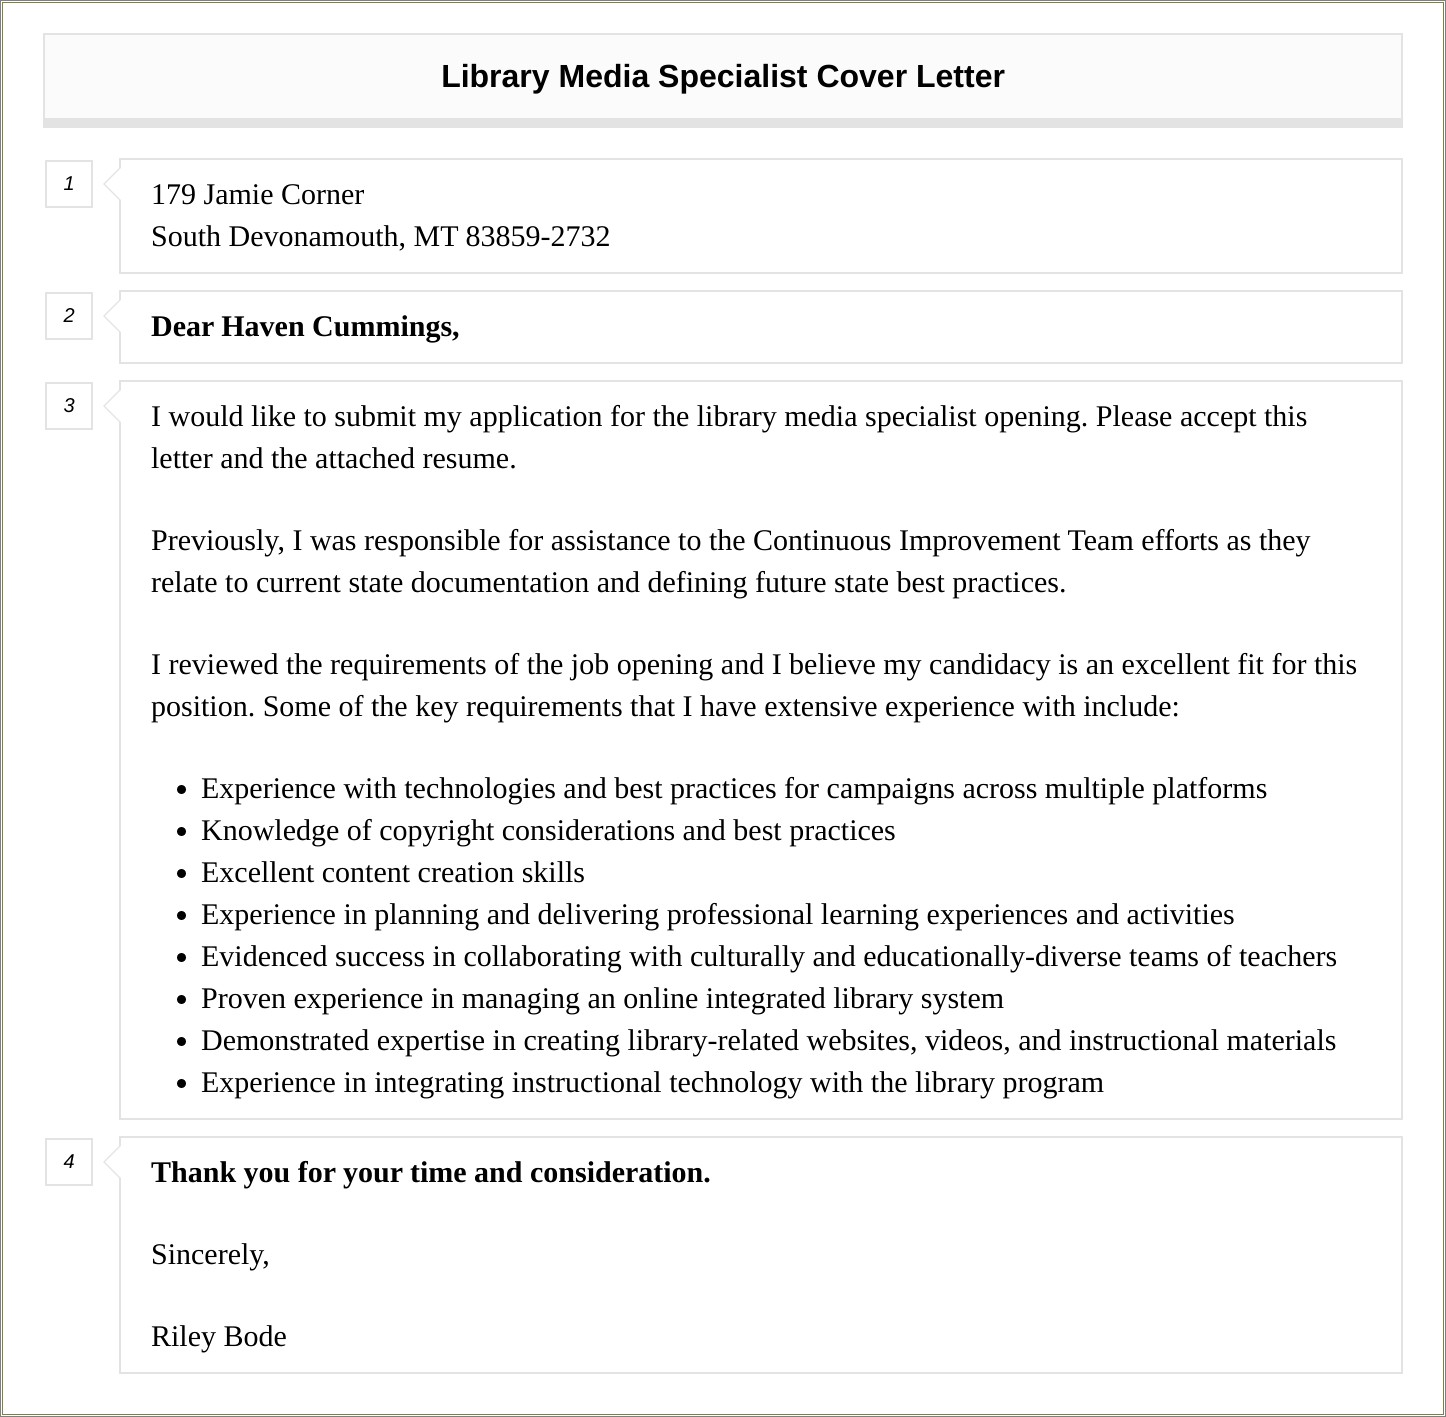 Library Media Specialist Resume Cover Letter